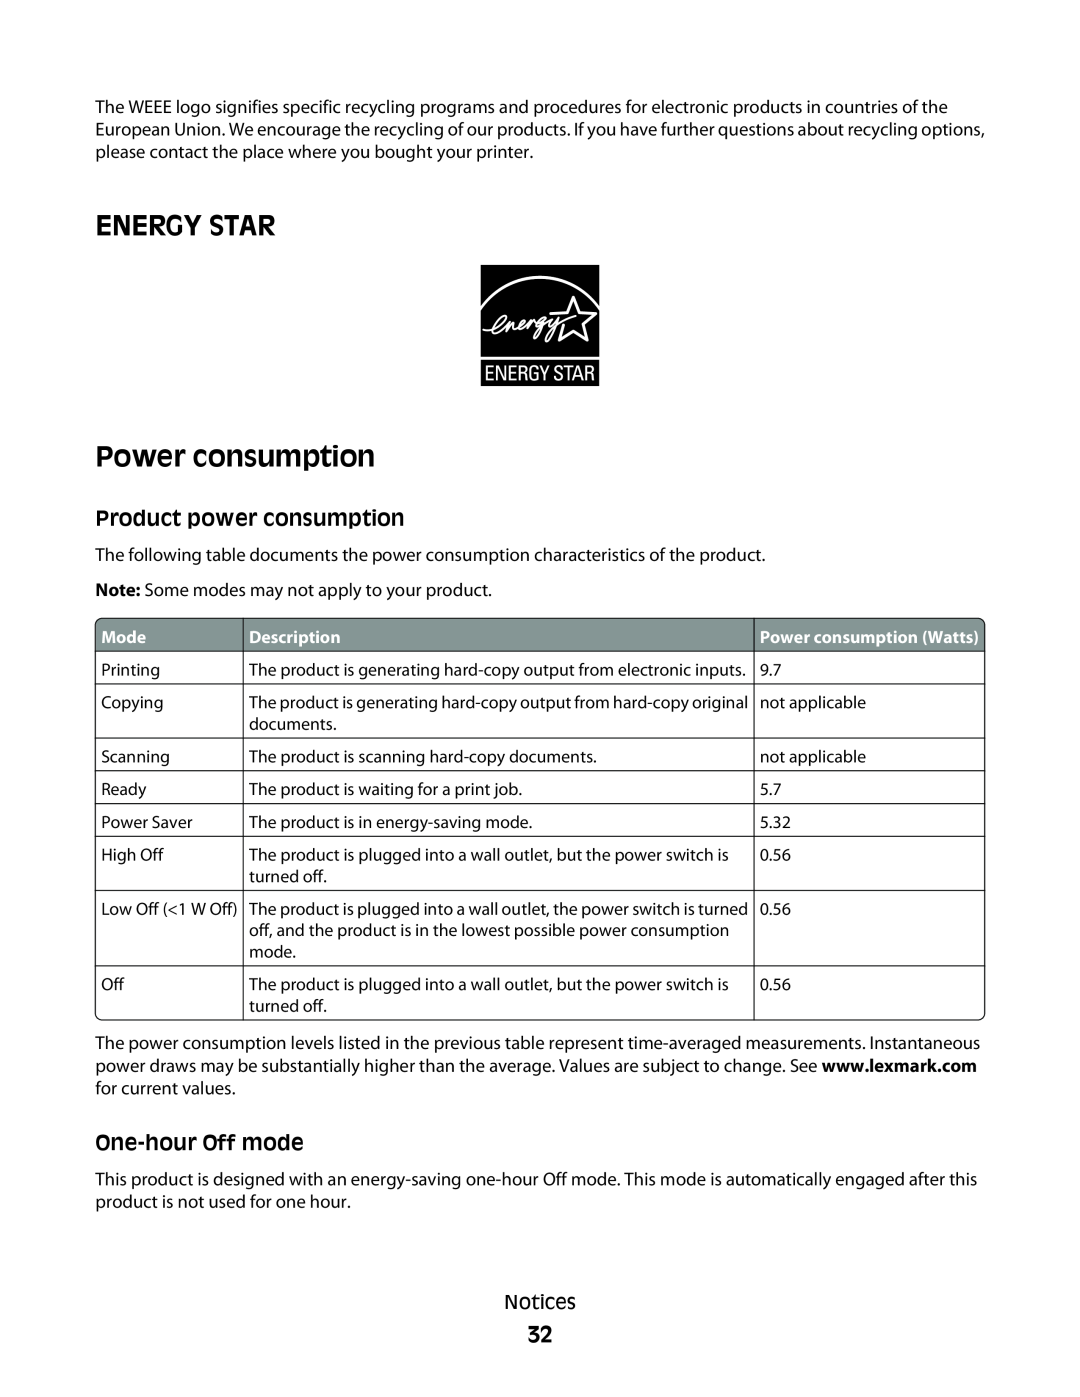 Lexmark P200 Series manual ENERGY STAR Power consumption, Product power consumption, One-hour Off mode 